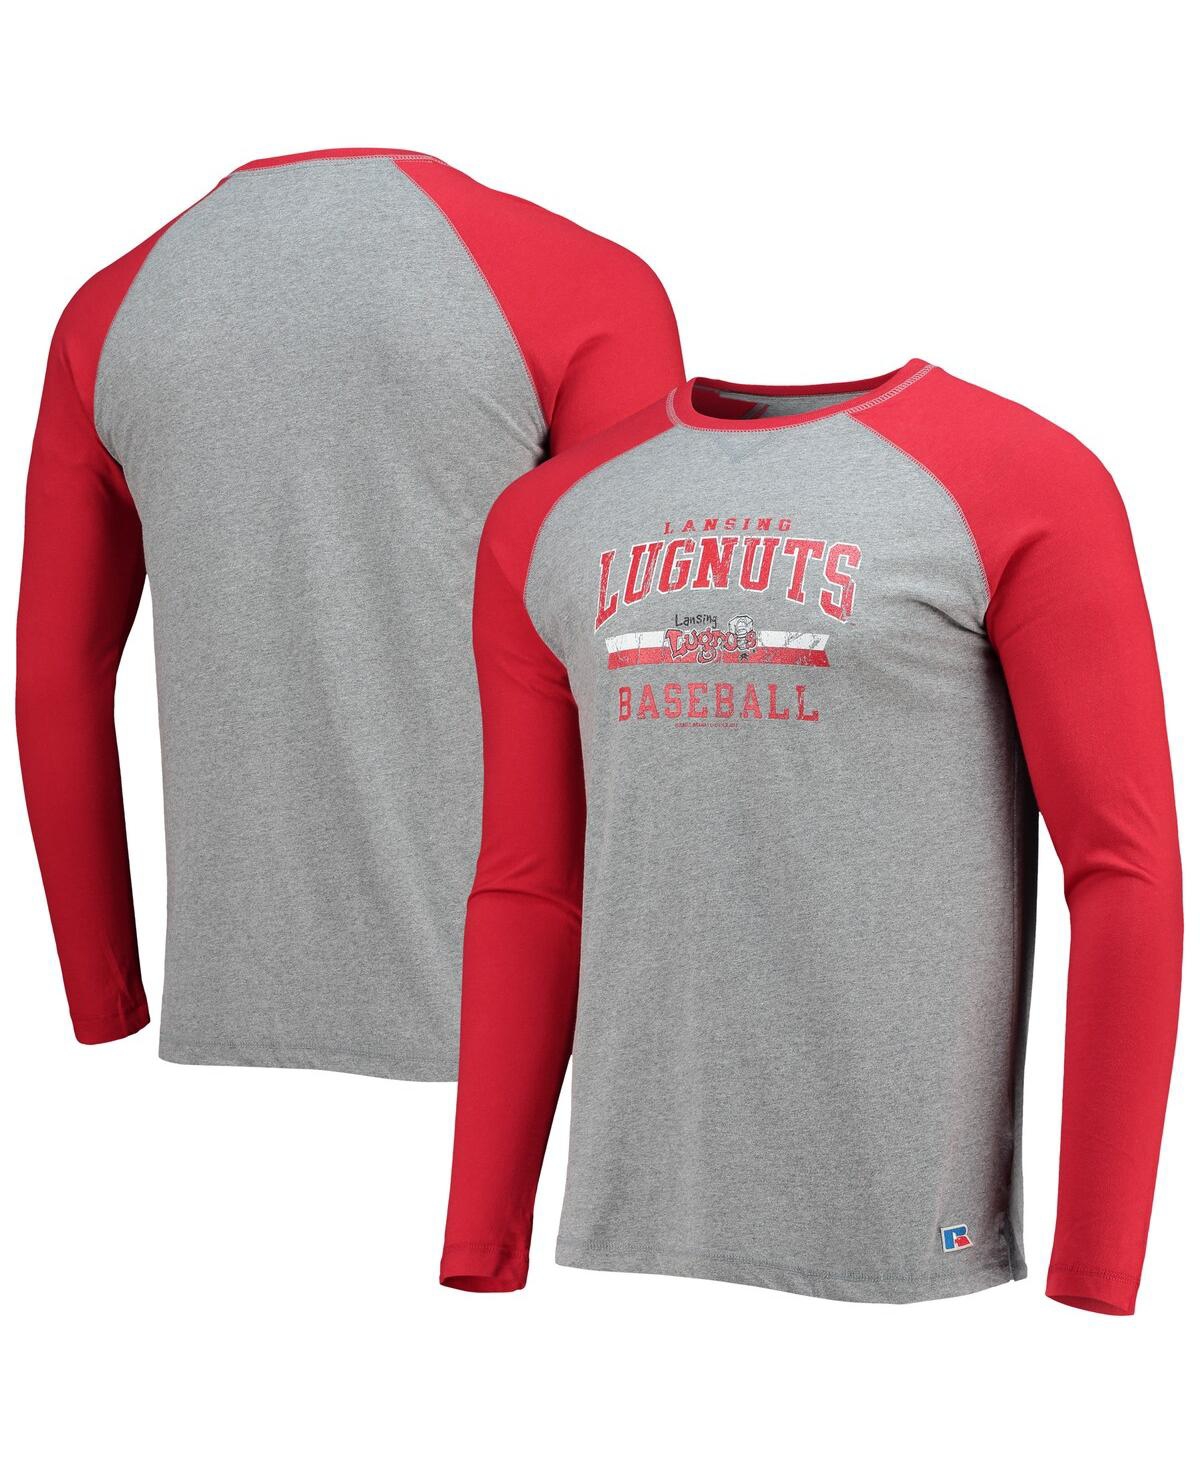 Boxercraft Men's Red, Heathered Gray Lansing Lugnuts Long Sleeve Baseball T-shirt In Red,heathered Gray